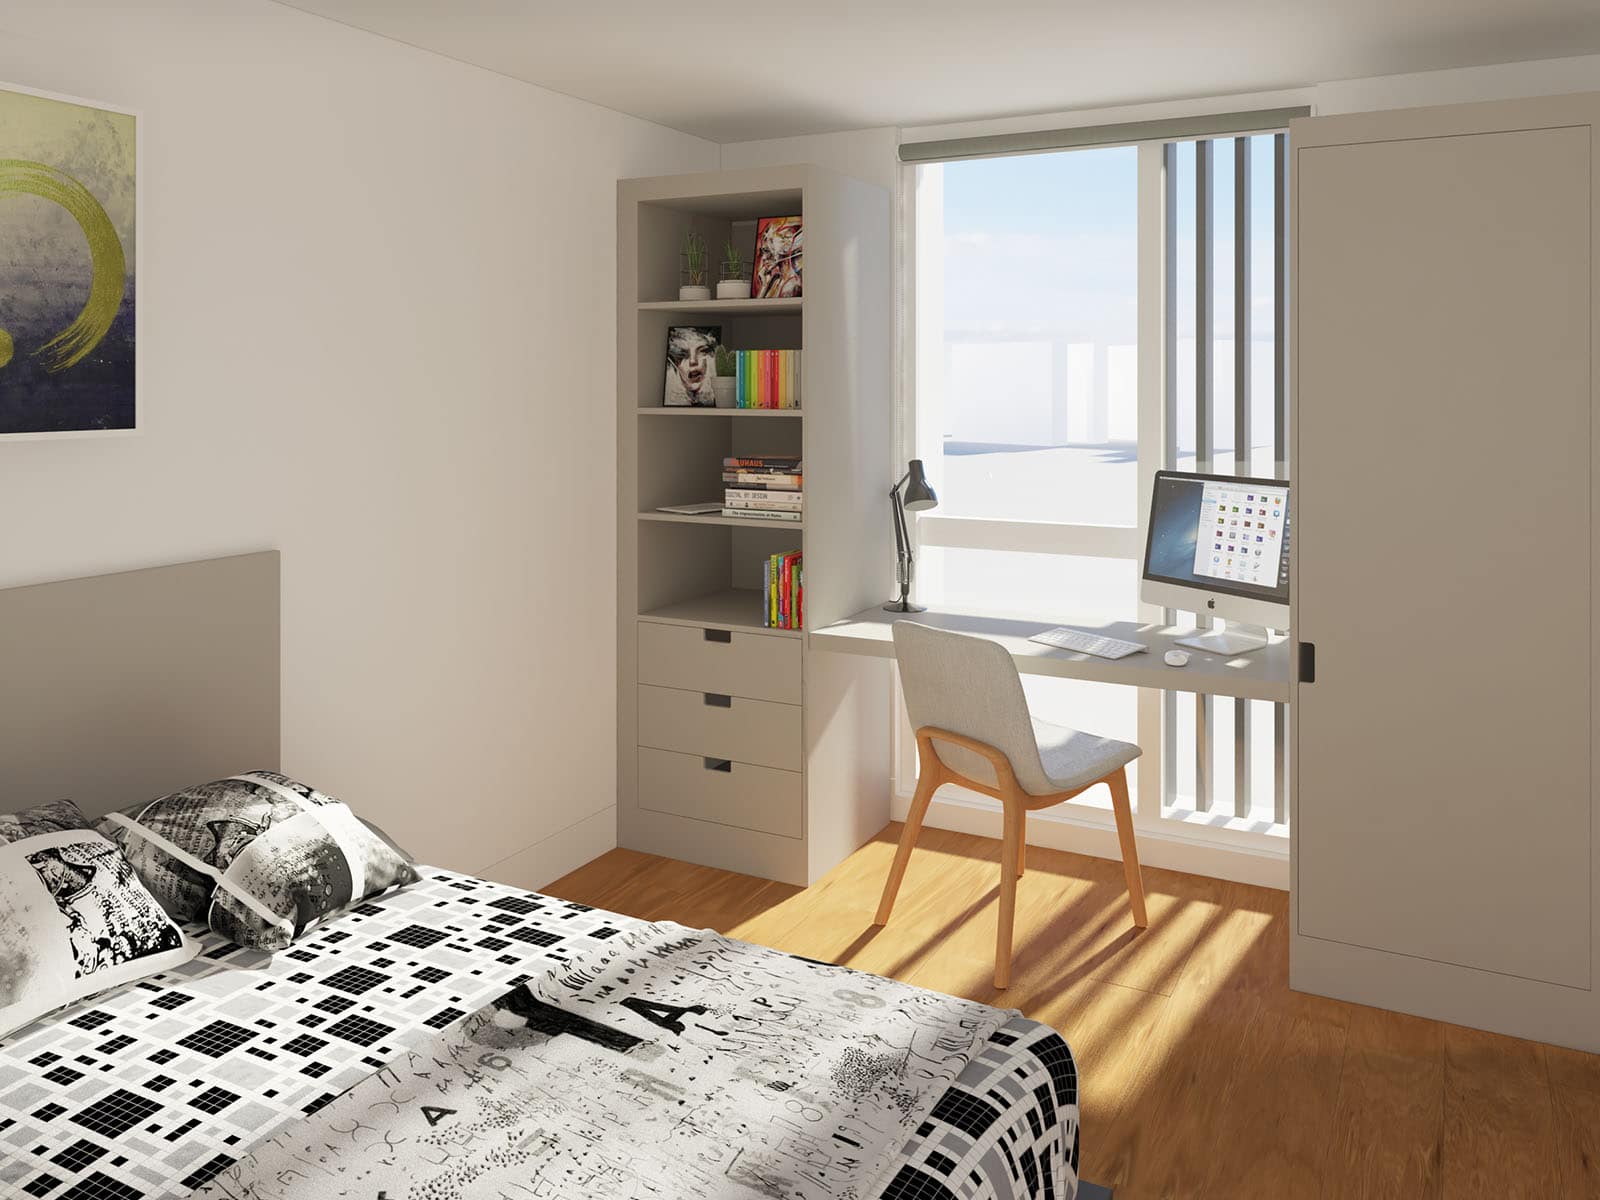 Cheapest and affordable Student Accommodation in Galway